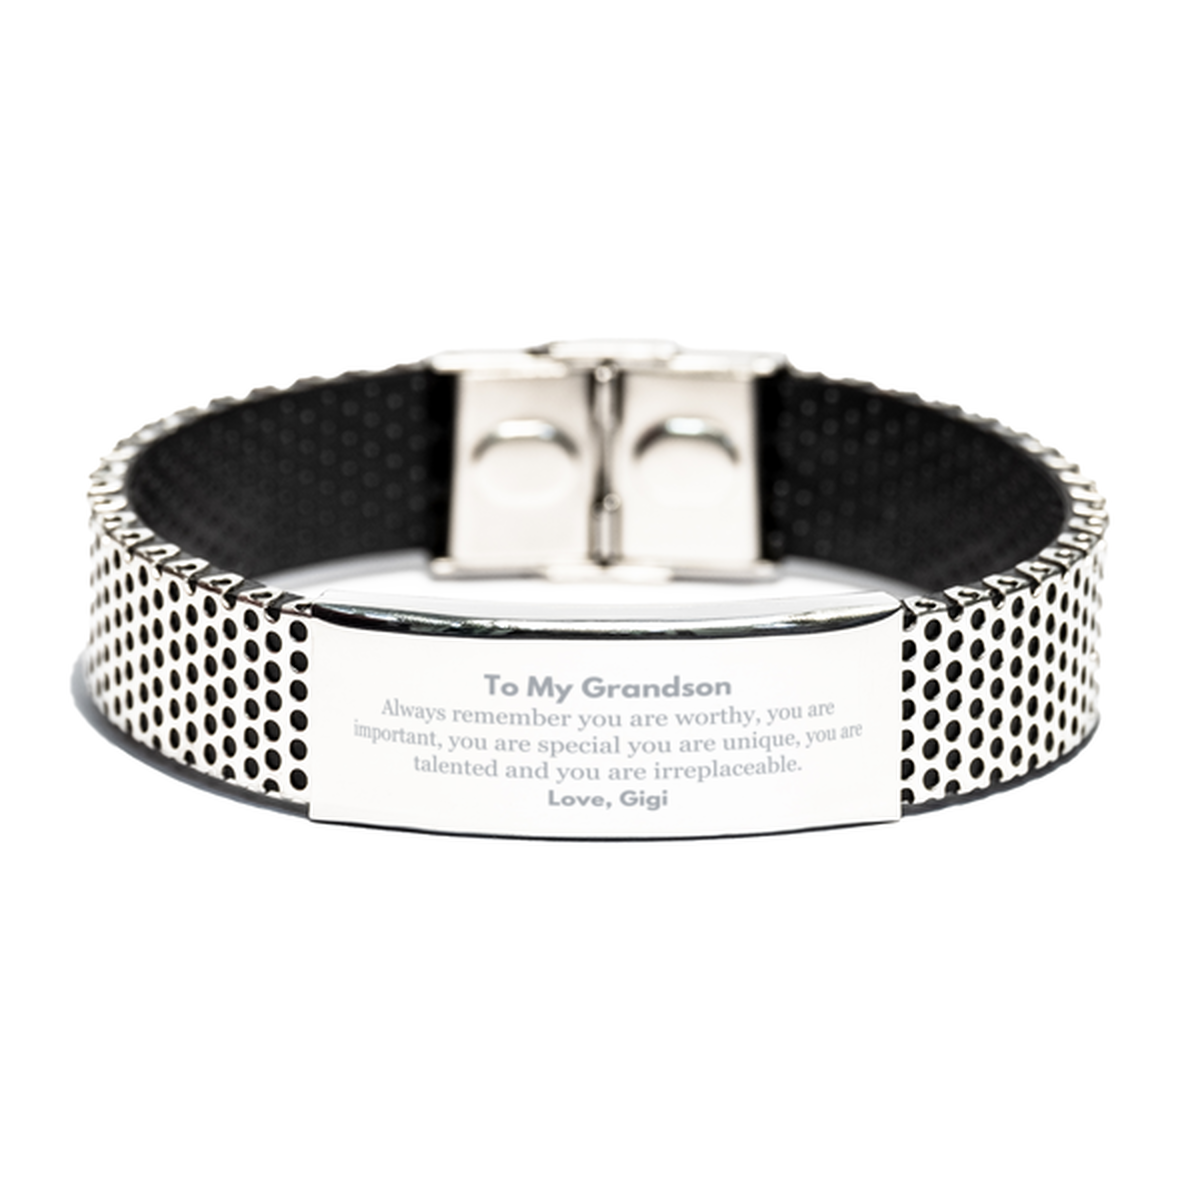 Grandson Birthday Gifts from Gigi, Inspirational Stainless Steel Bracelet for Grandson Christmas Graduation Gifts for Grandson Always remember you are worthy, you are important. Love, Gigi